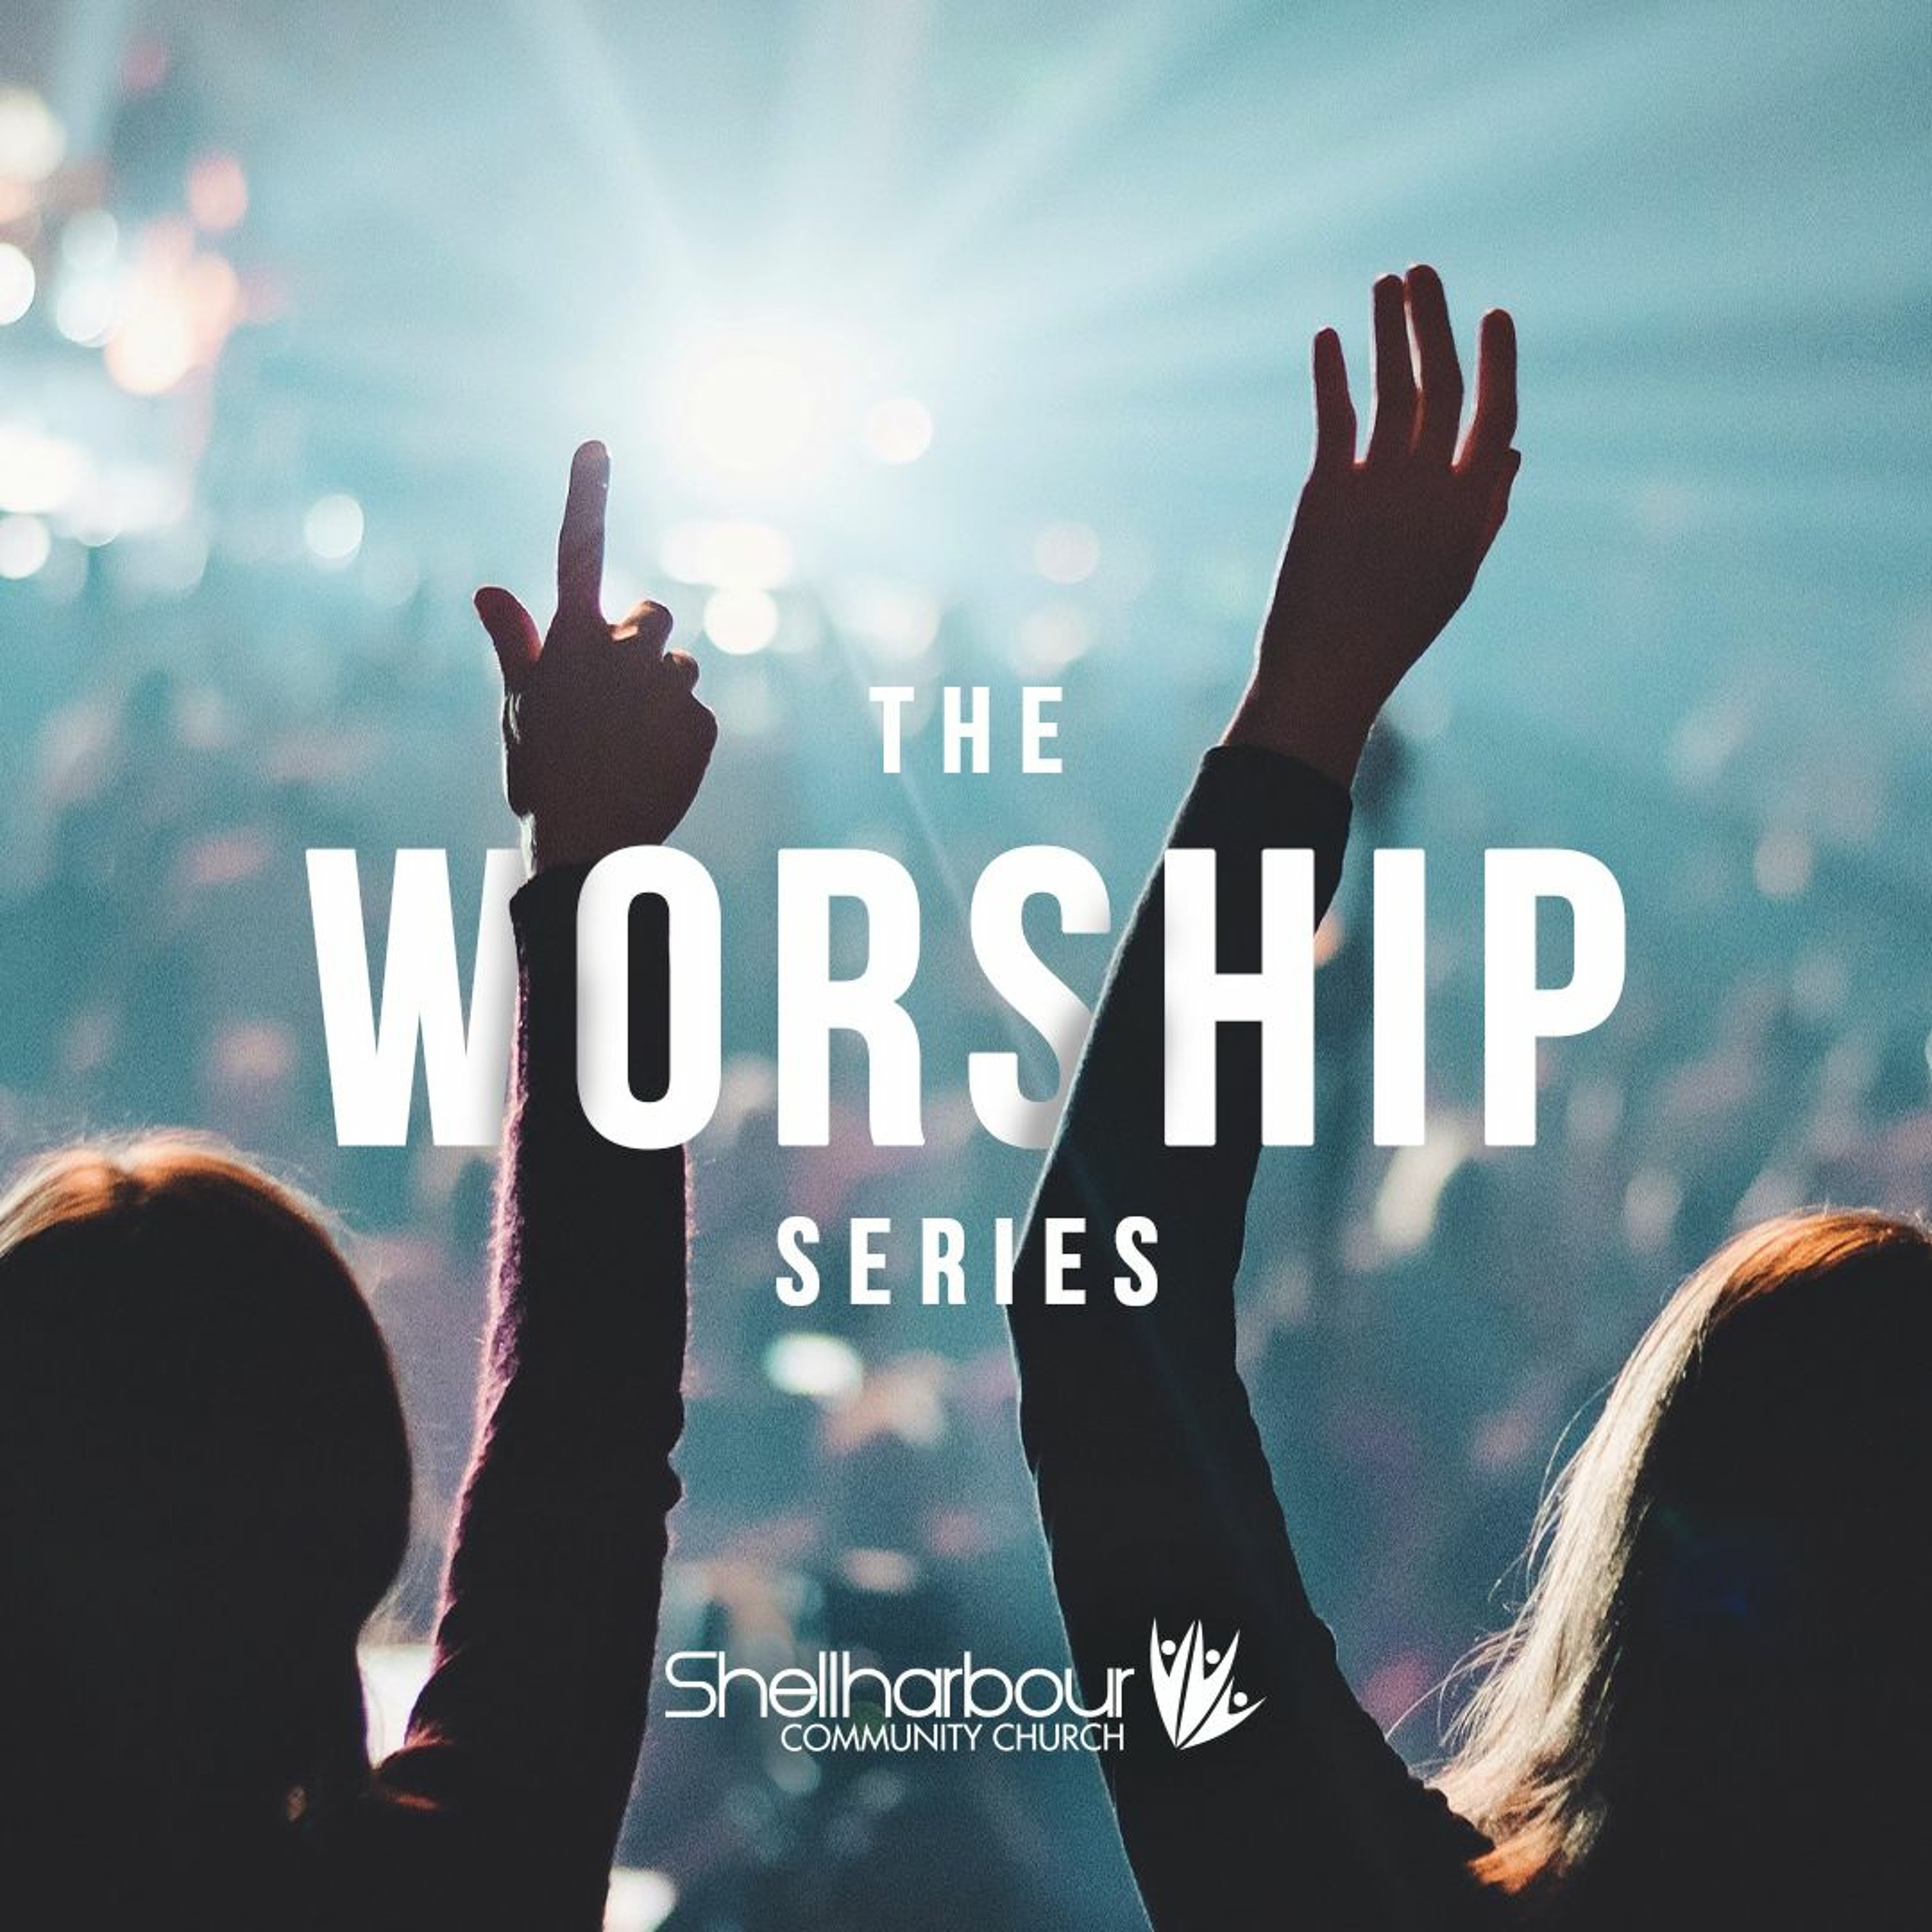 The Power of Worship - Thom Dwyer - SEP 1 PM Service